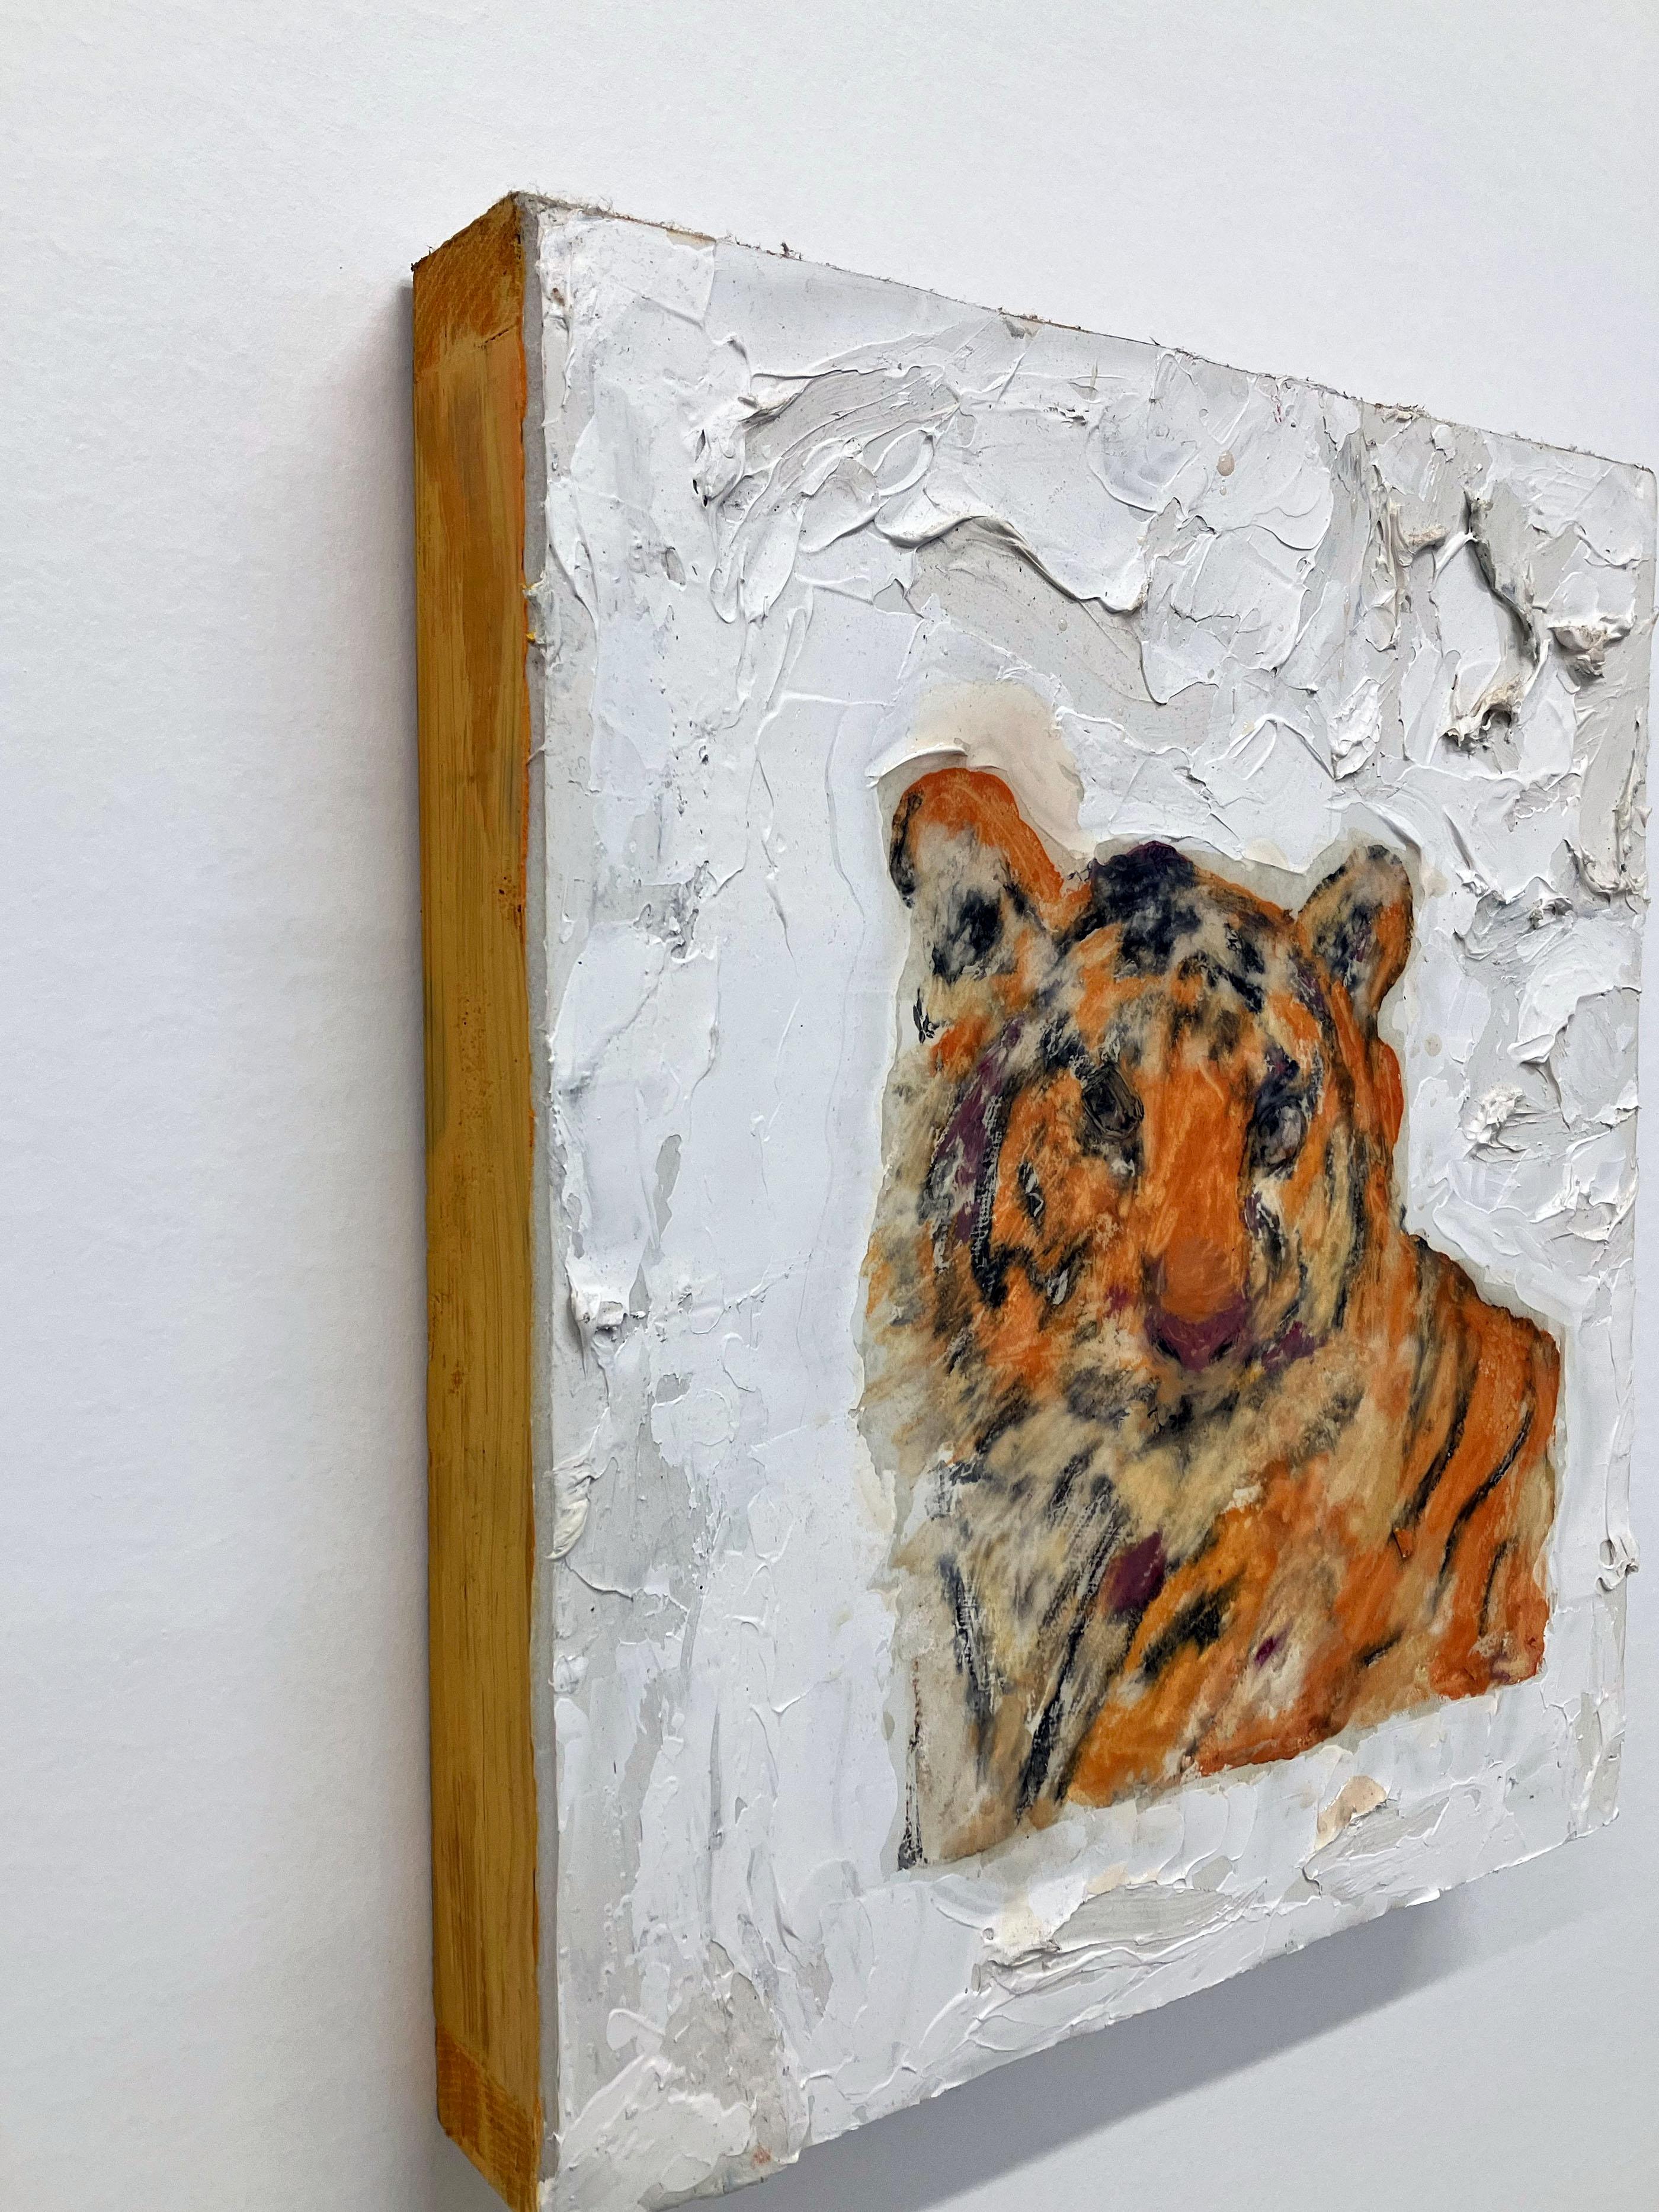 Oil, silicon, resin, and gesso on wood panel. Animal portrait: tiger. Wildlife. Endangered species. 